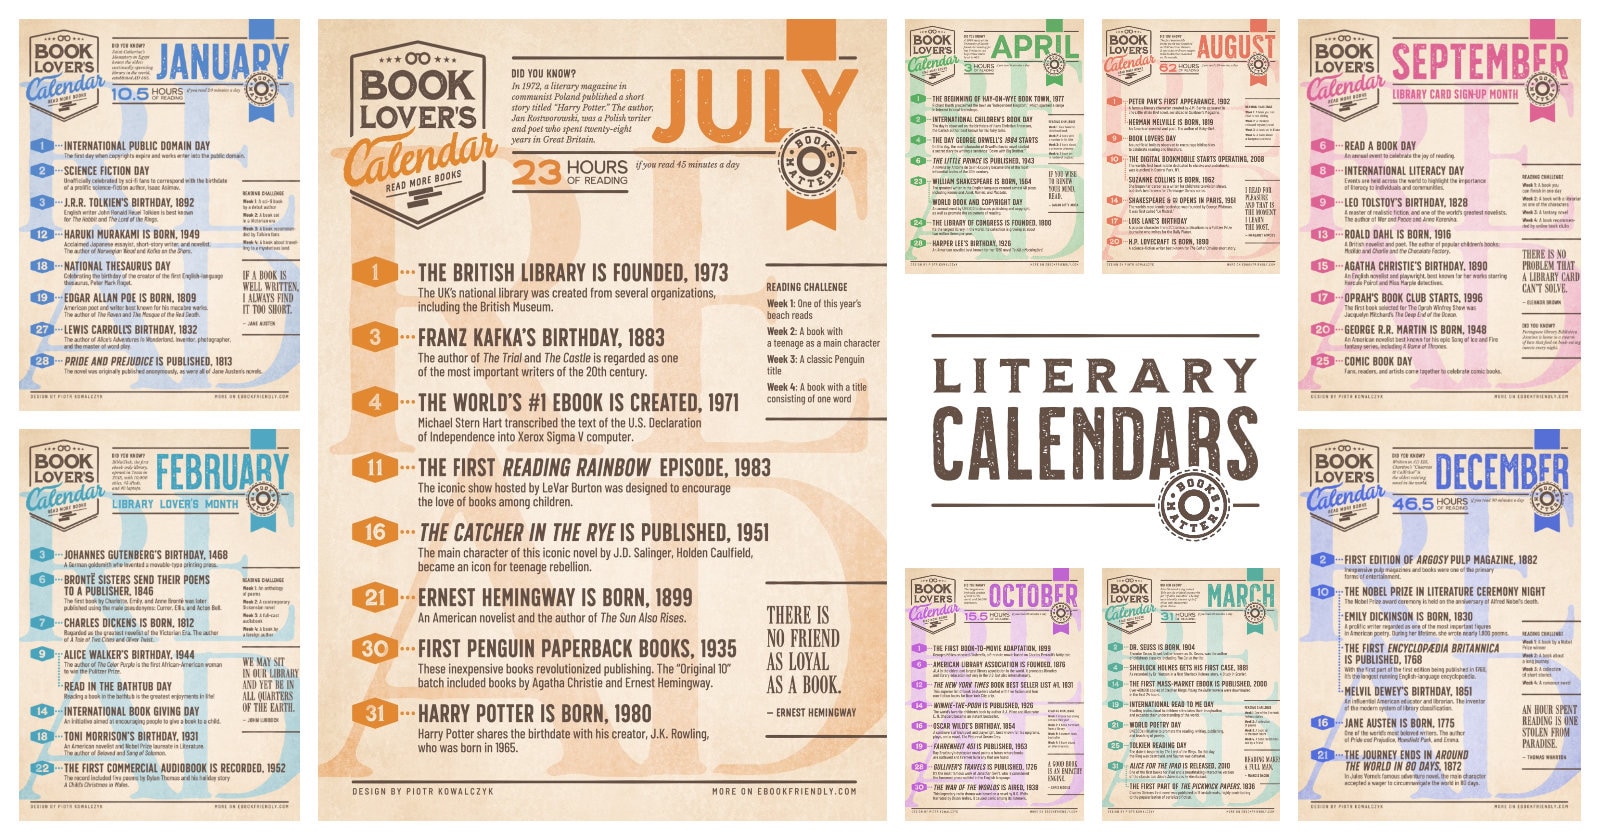 Literary calendars for 12 months of your exciting reading life!